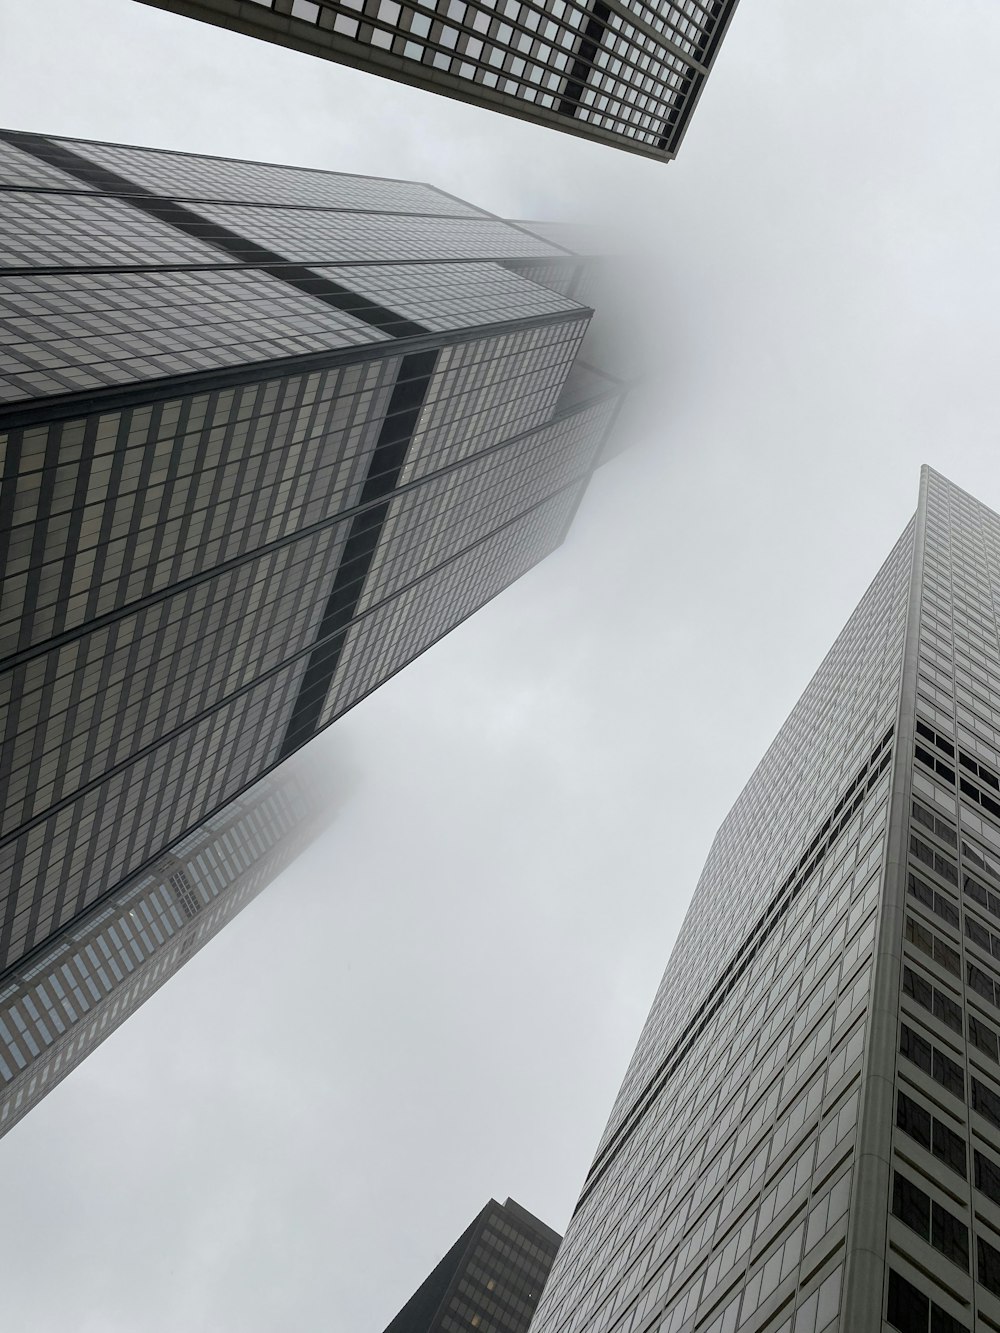 a low angle view of tall buildings